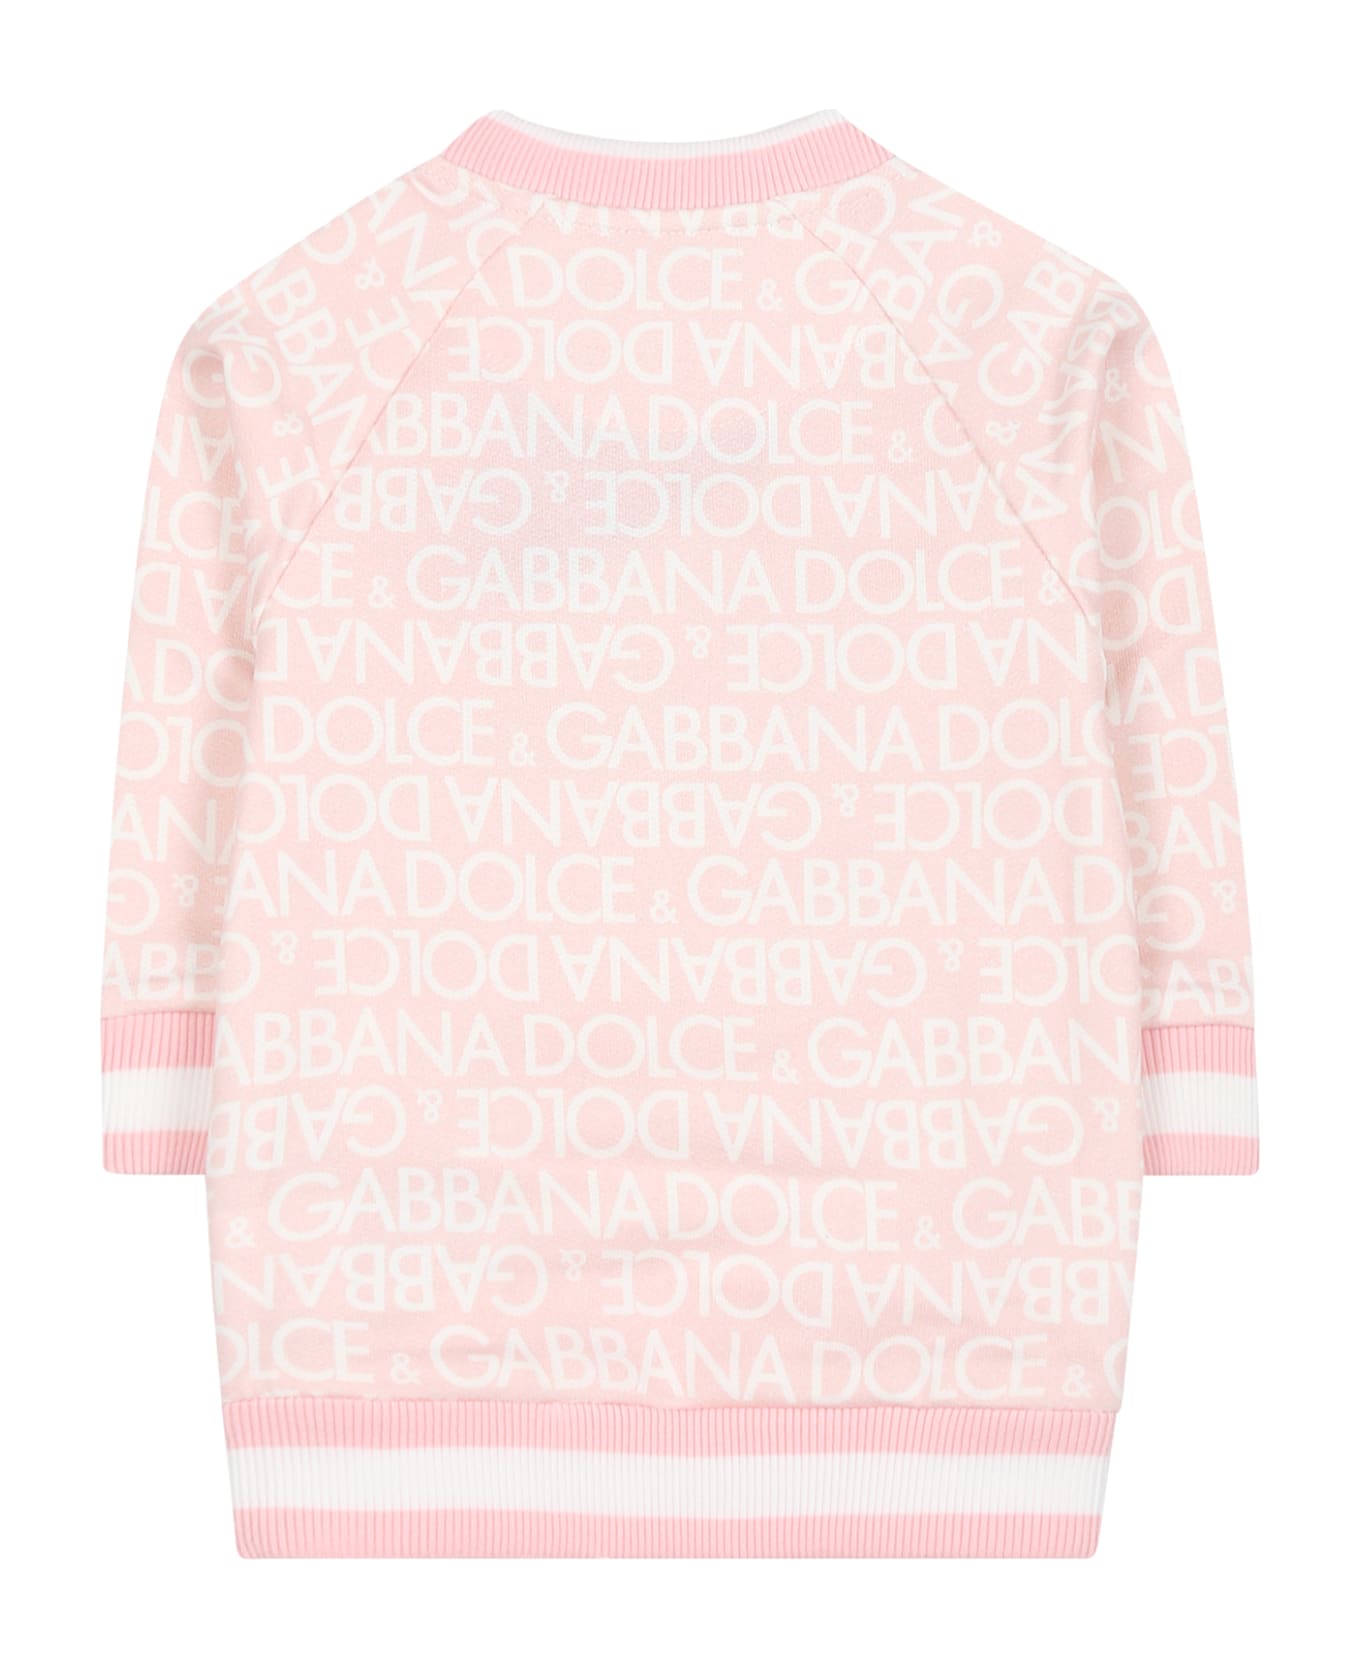 Dolce & Gabbana Pink Sweatshirt For Baby Girl With Leopard Print And Logo - Pink